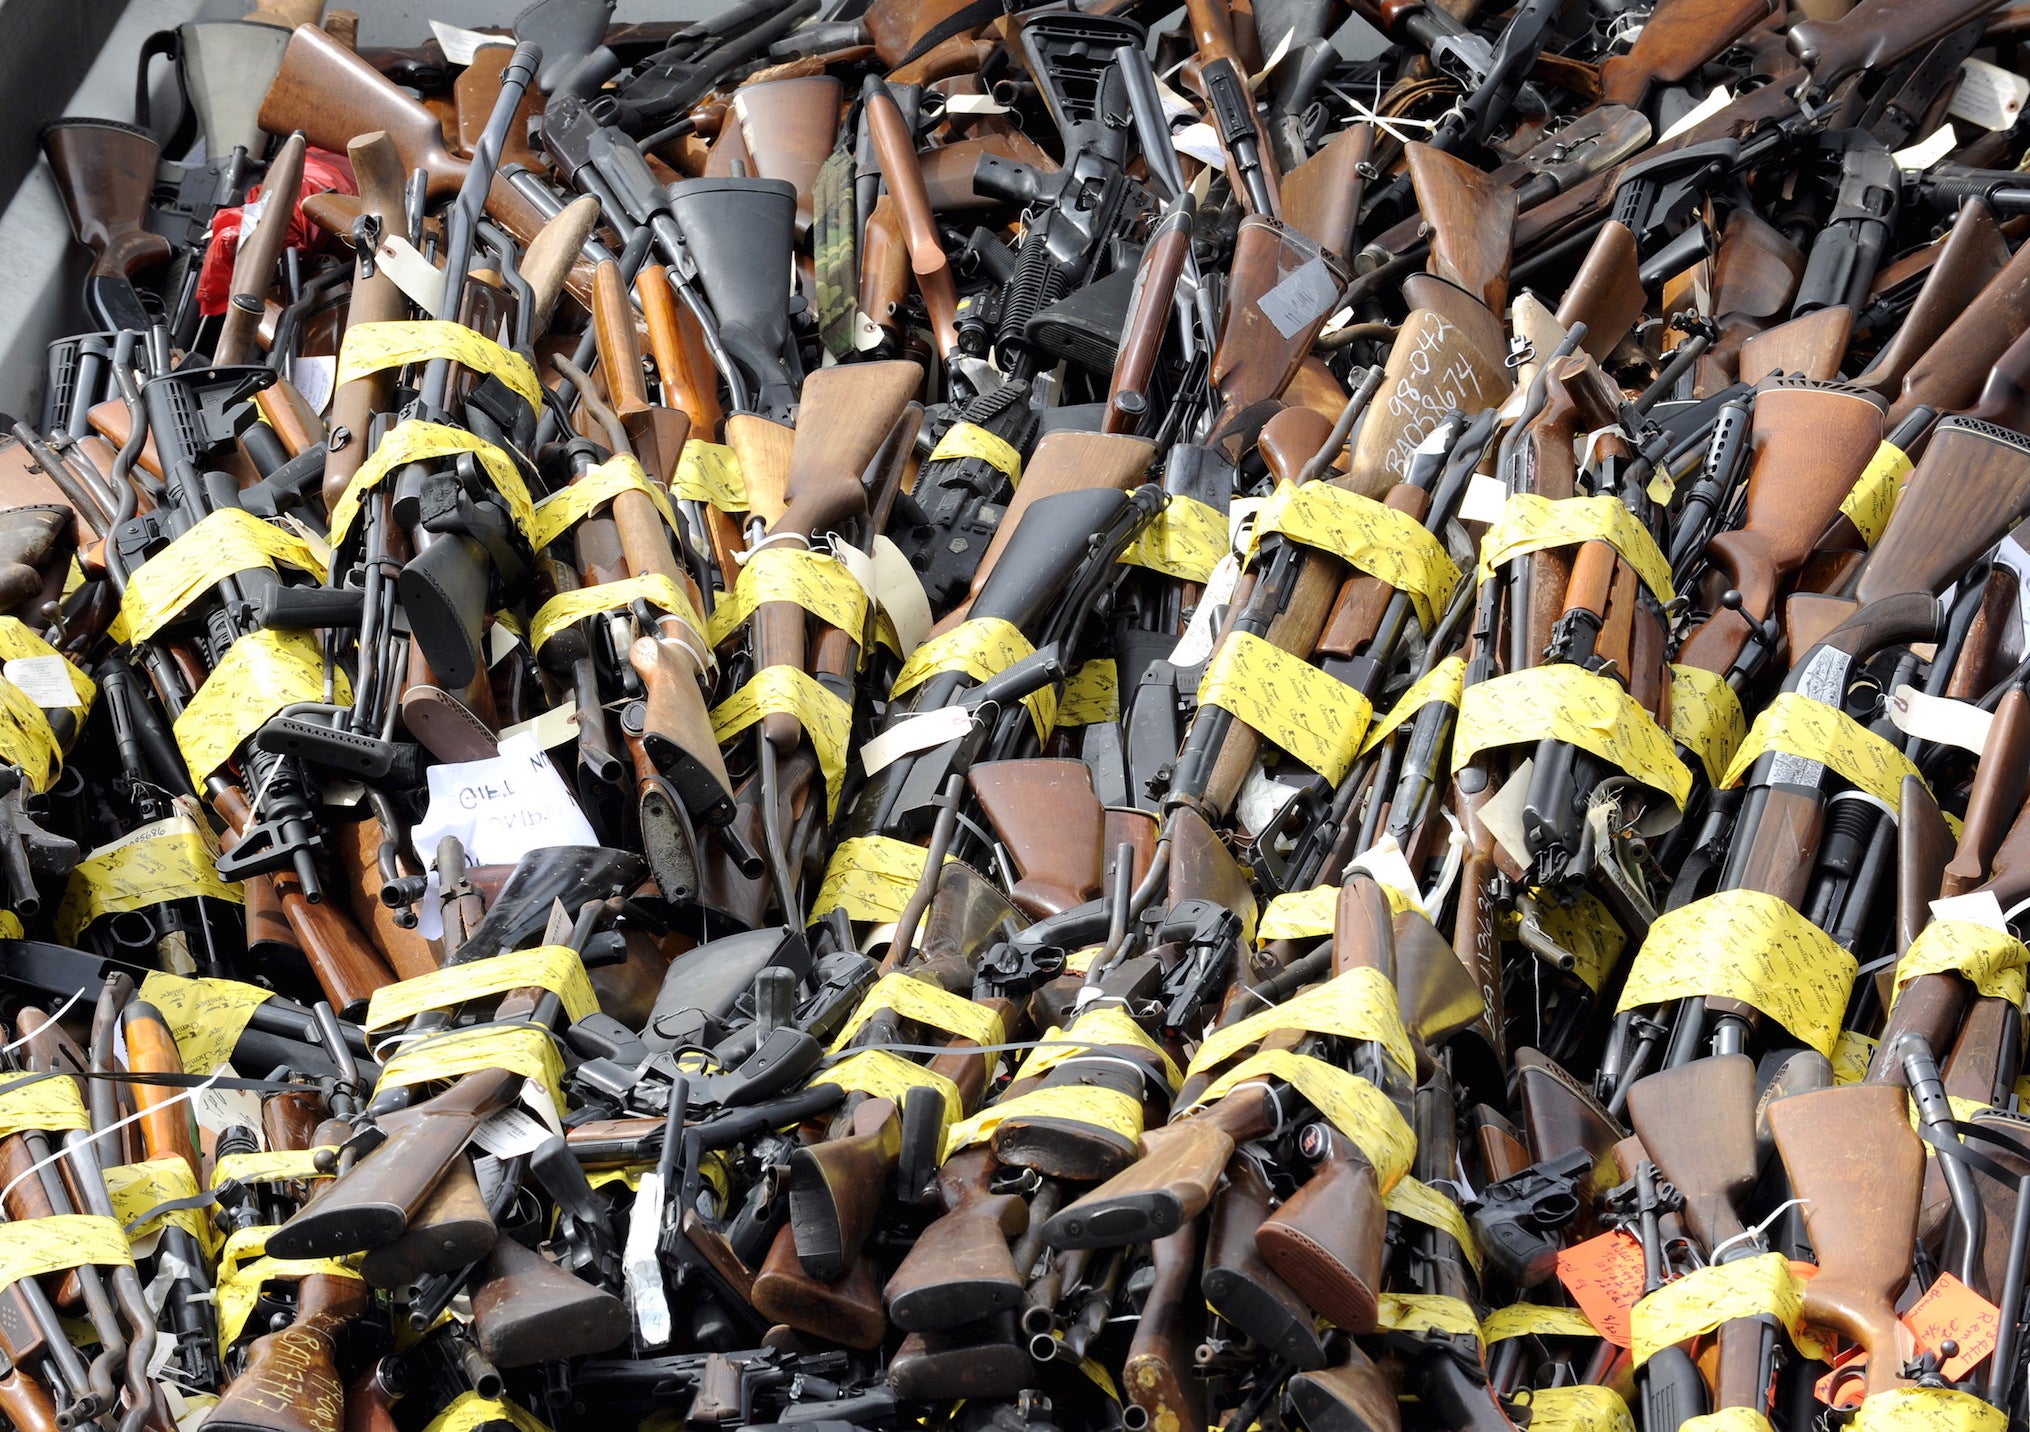 Approximately 3,400 confiscated weapons sit inside a dump truck during the 22nd Annual Gun Melt in Rancho Cucamonga, California on 6 July 2015.